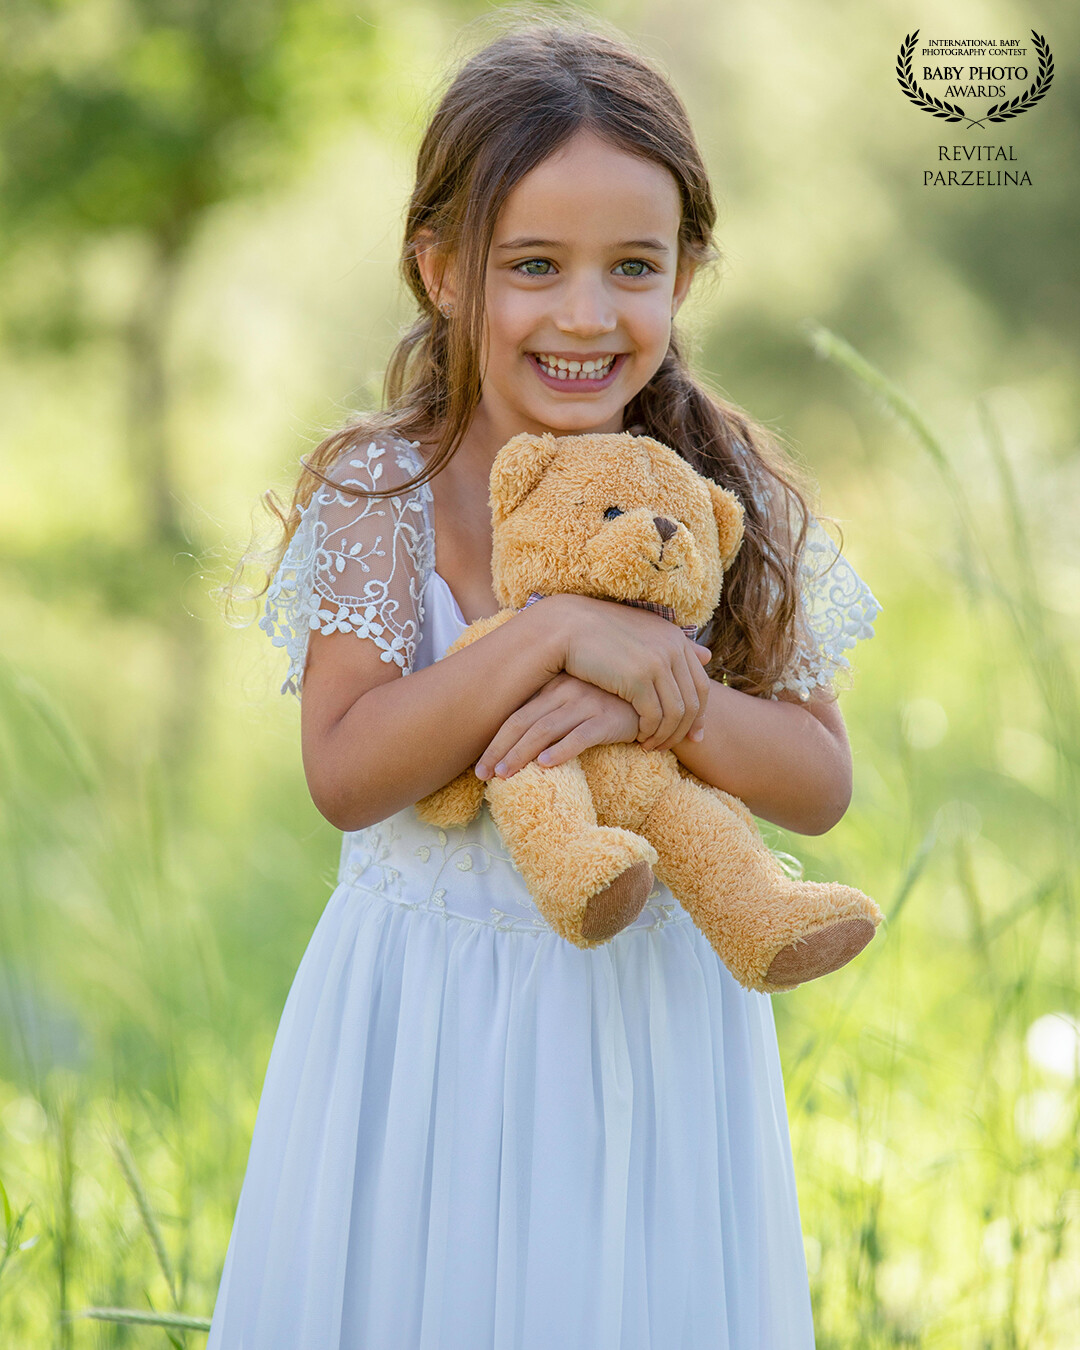 "With boundless joy, a girl embraces her teddy bear, radiating happiness in a tender moment that captures the purest essence of childhood bliss."